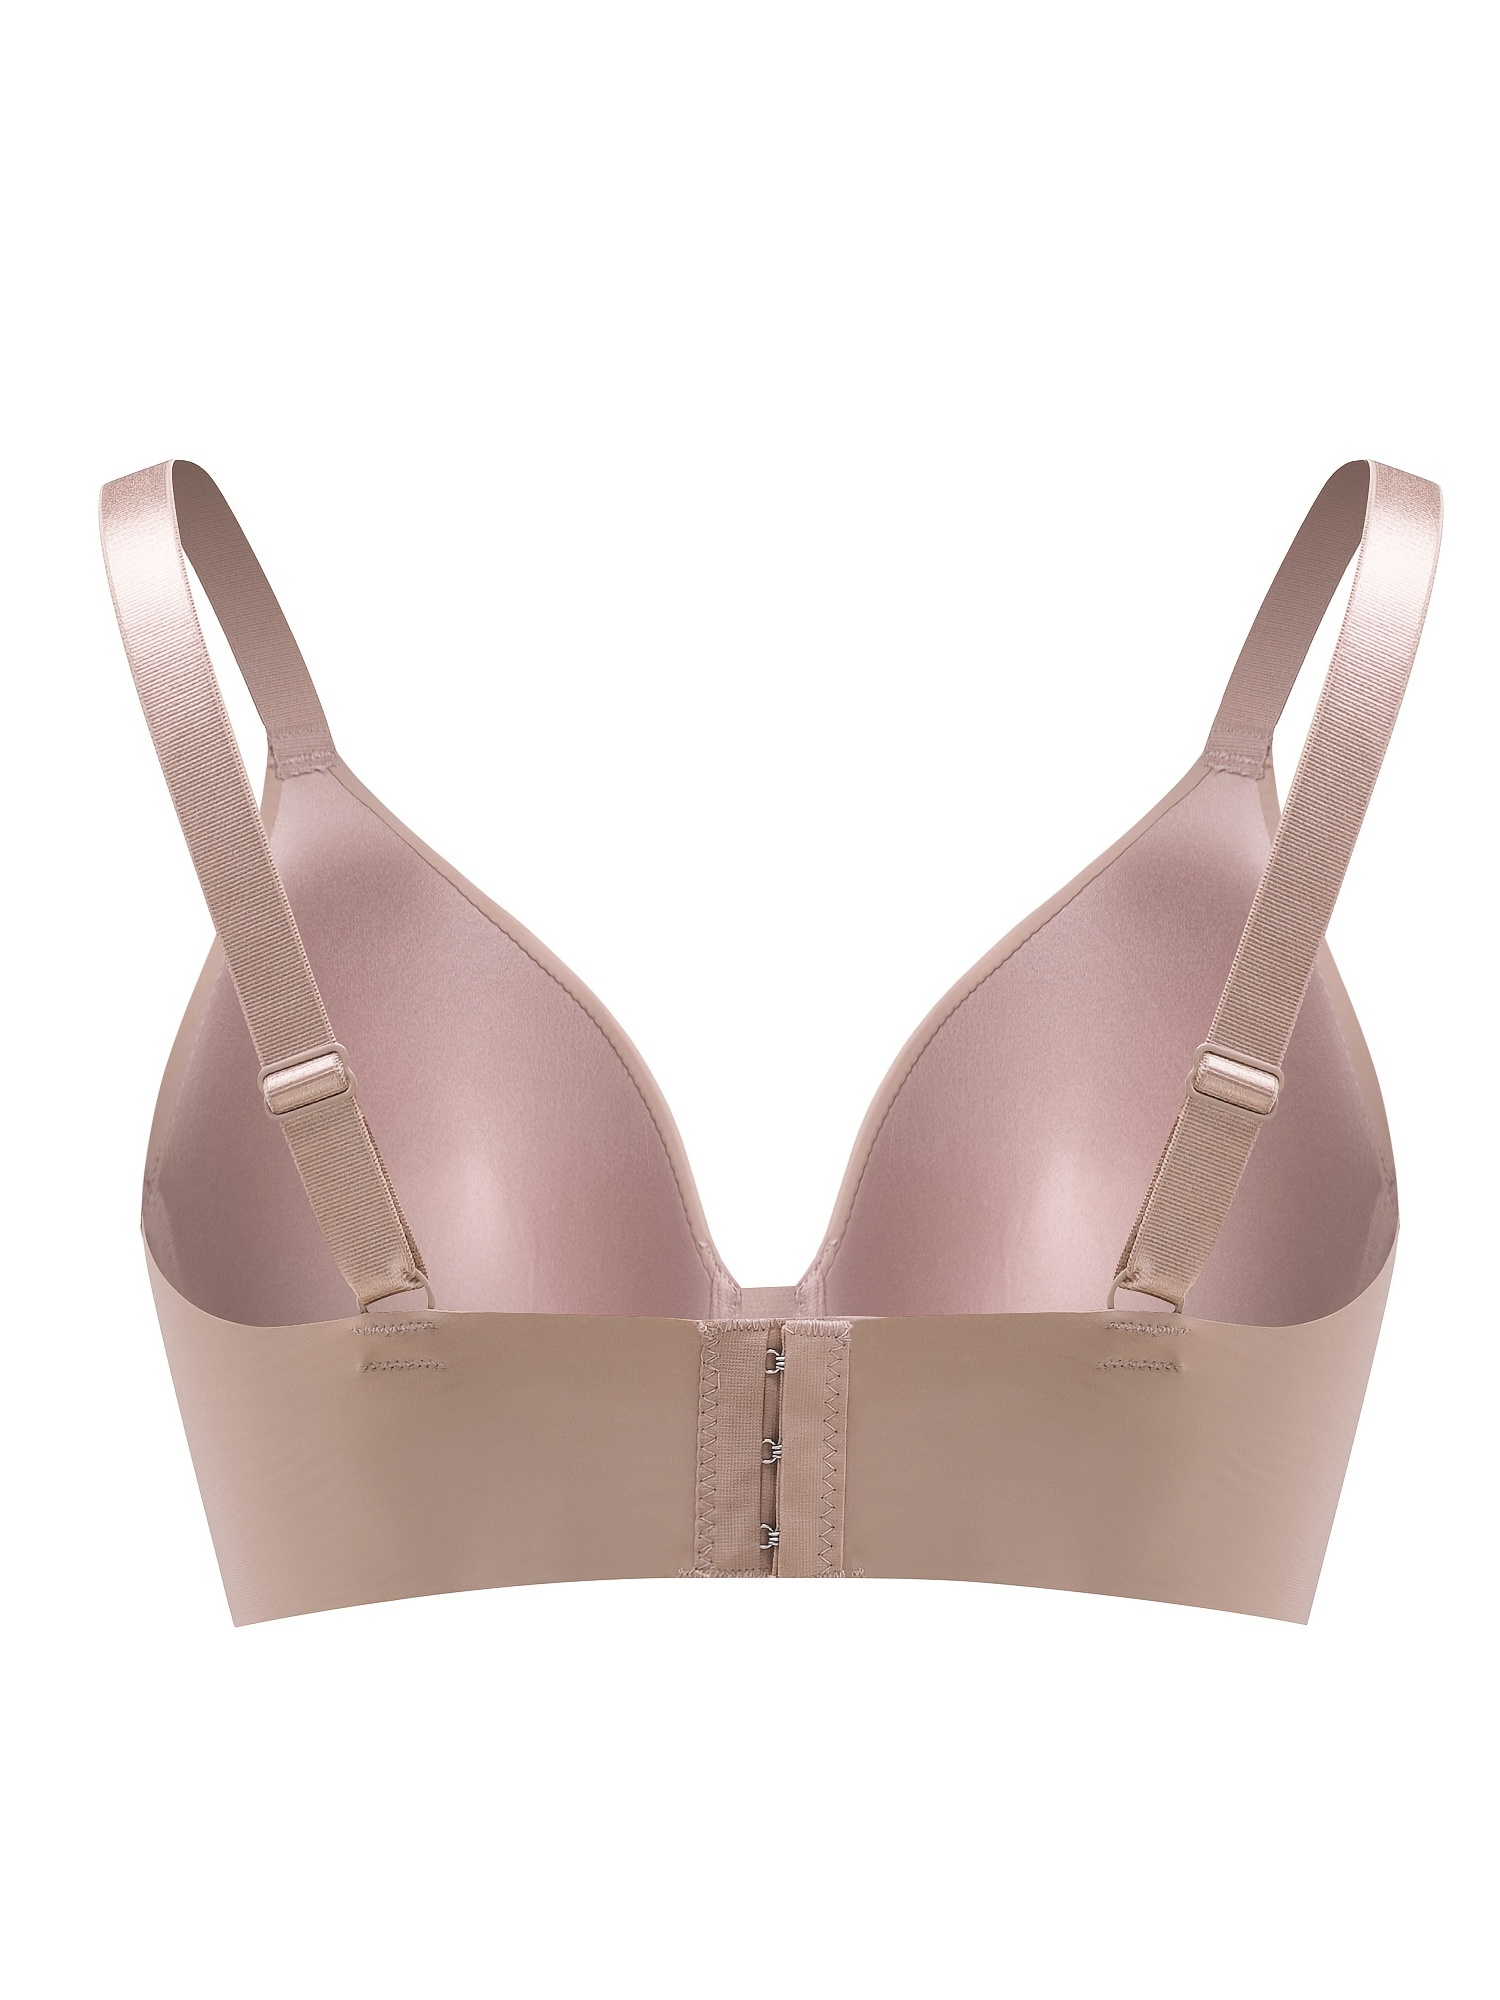 Buy GINGER BY LIFESTYLE Women Grey Solid Bras - 32D at